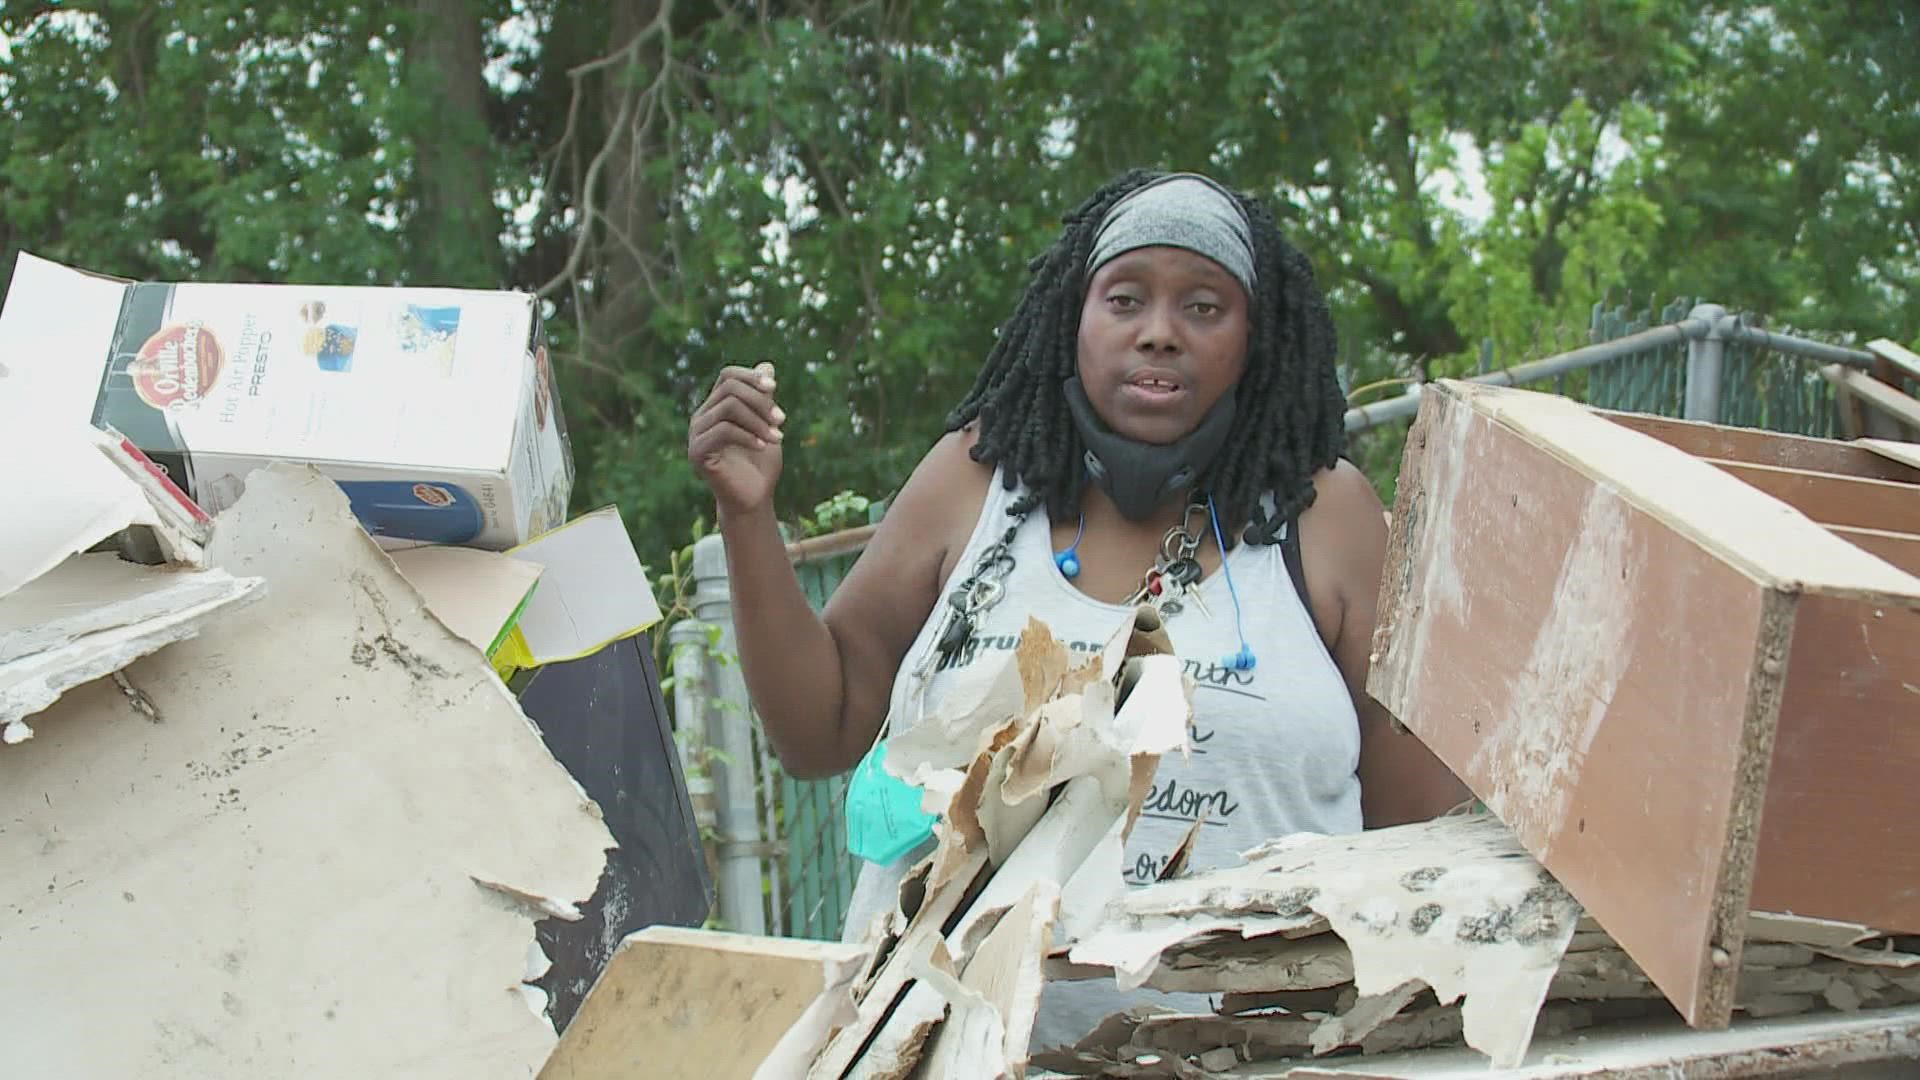 Rebuilding together New Orleans says it has helped gut, remediate and tarp 50 homes in the city since Hurricane Ida.